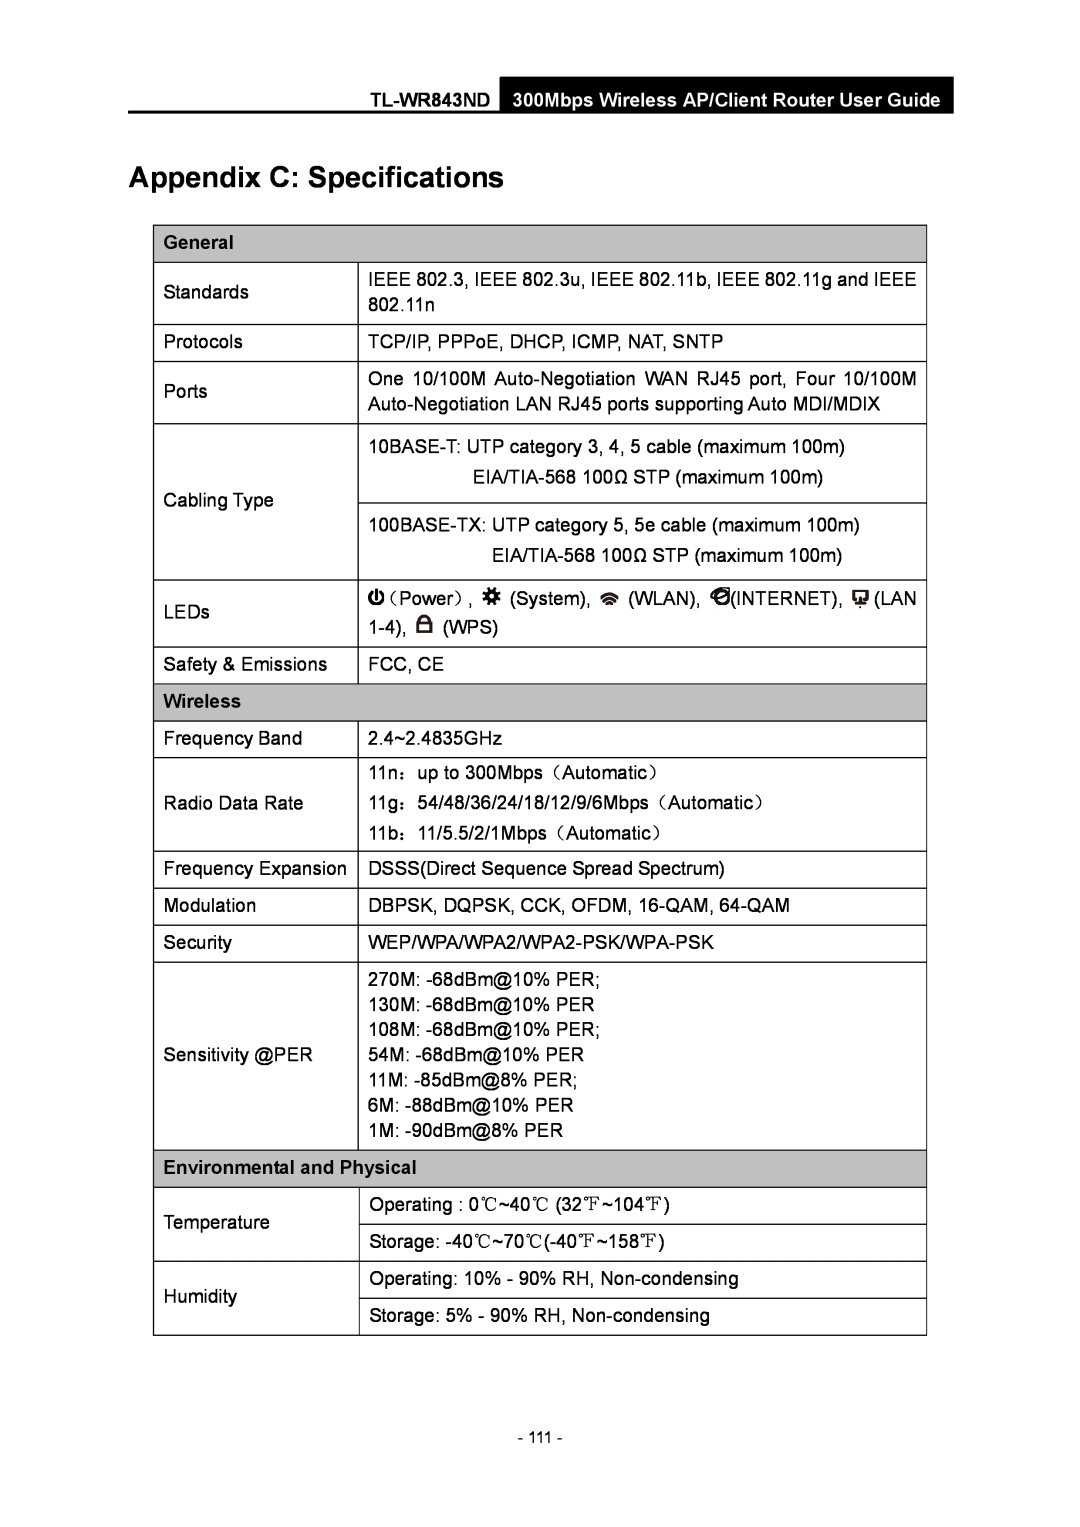 TP-Link TL-WR843ND manual Appendix C Specifications, General, Wireless, Environmental and Physical 